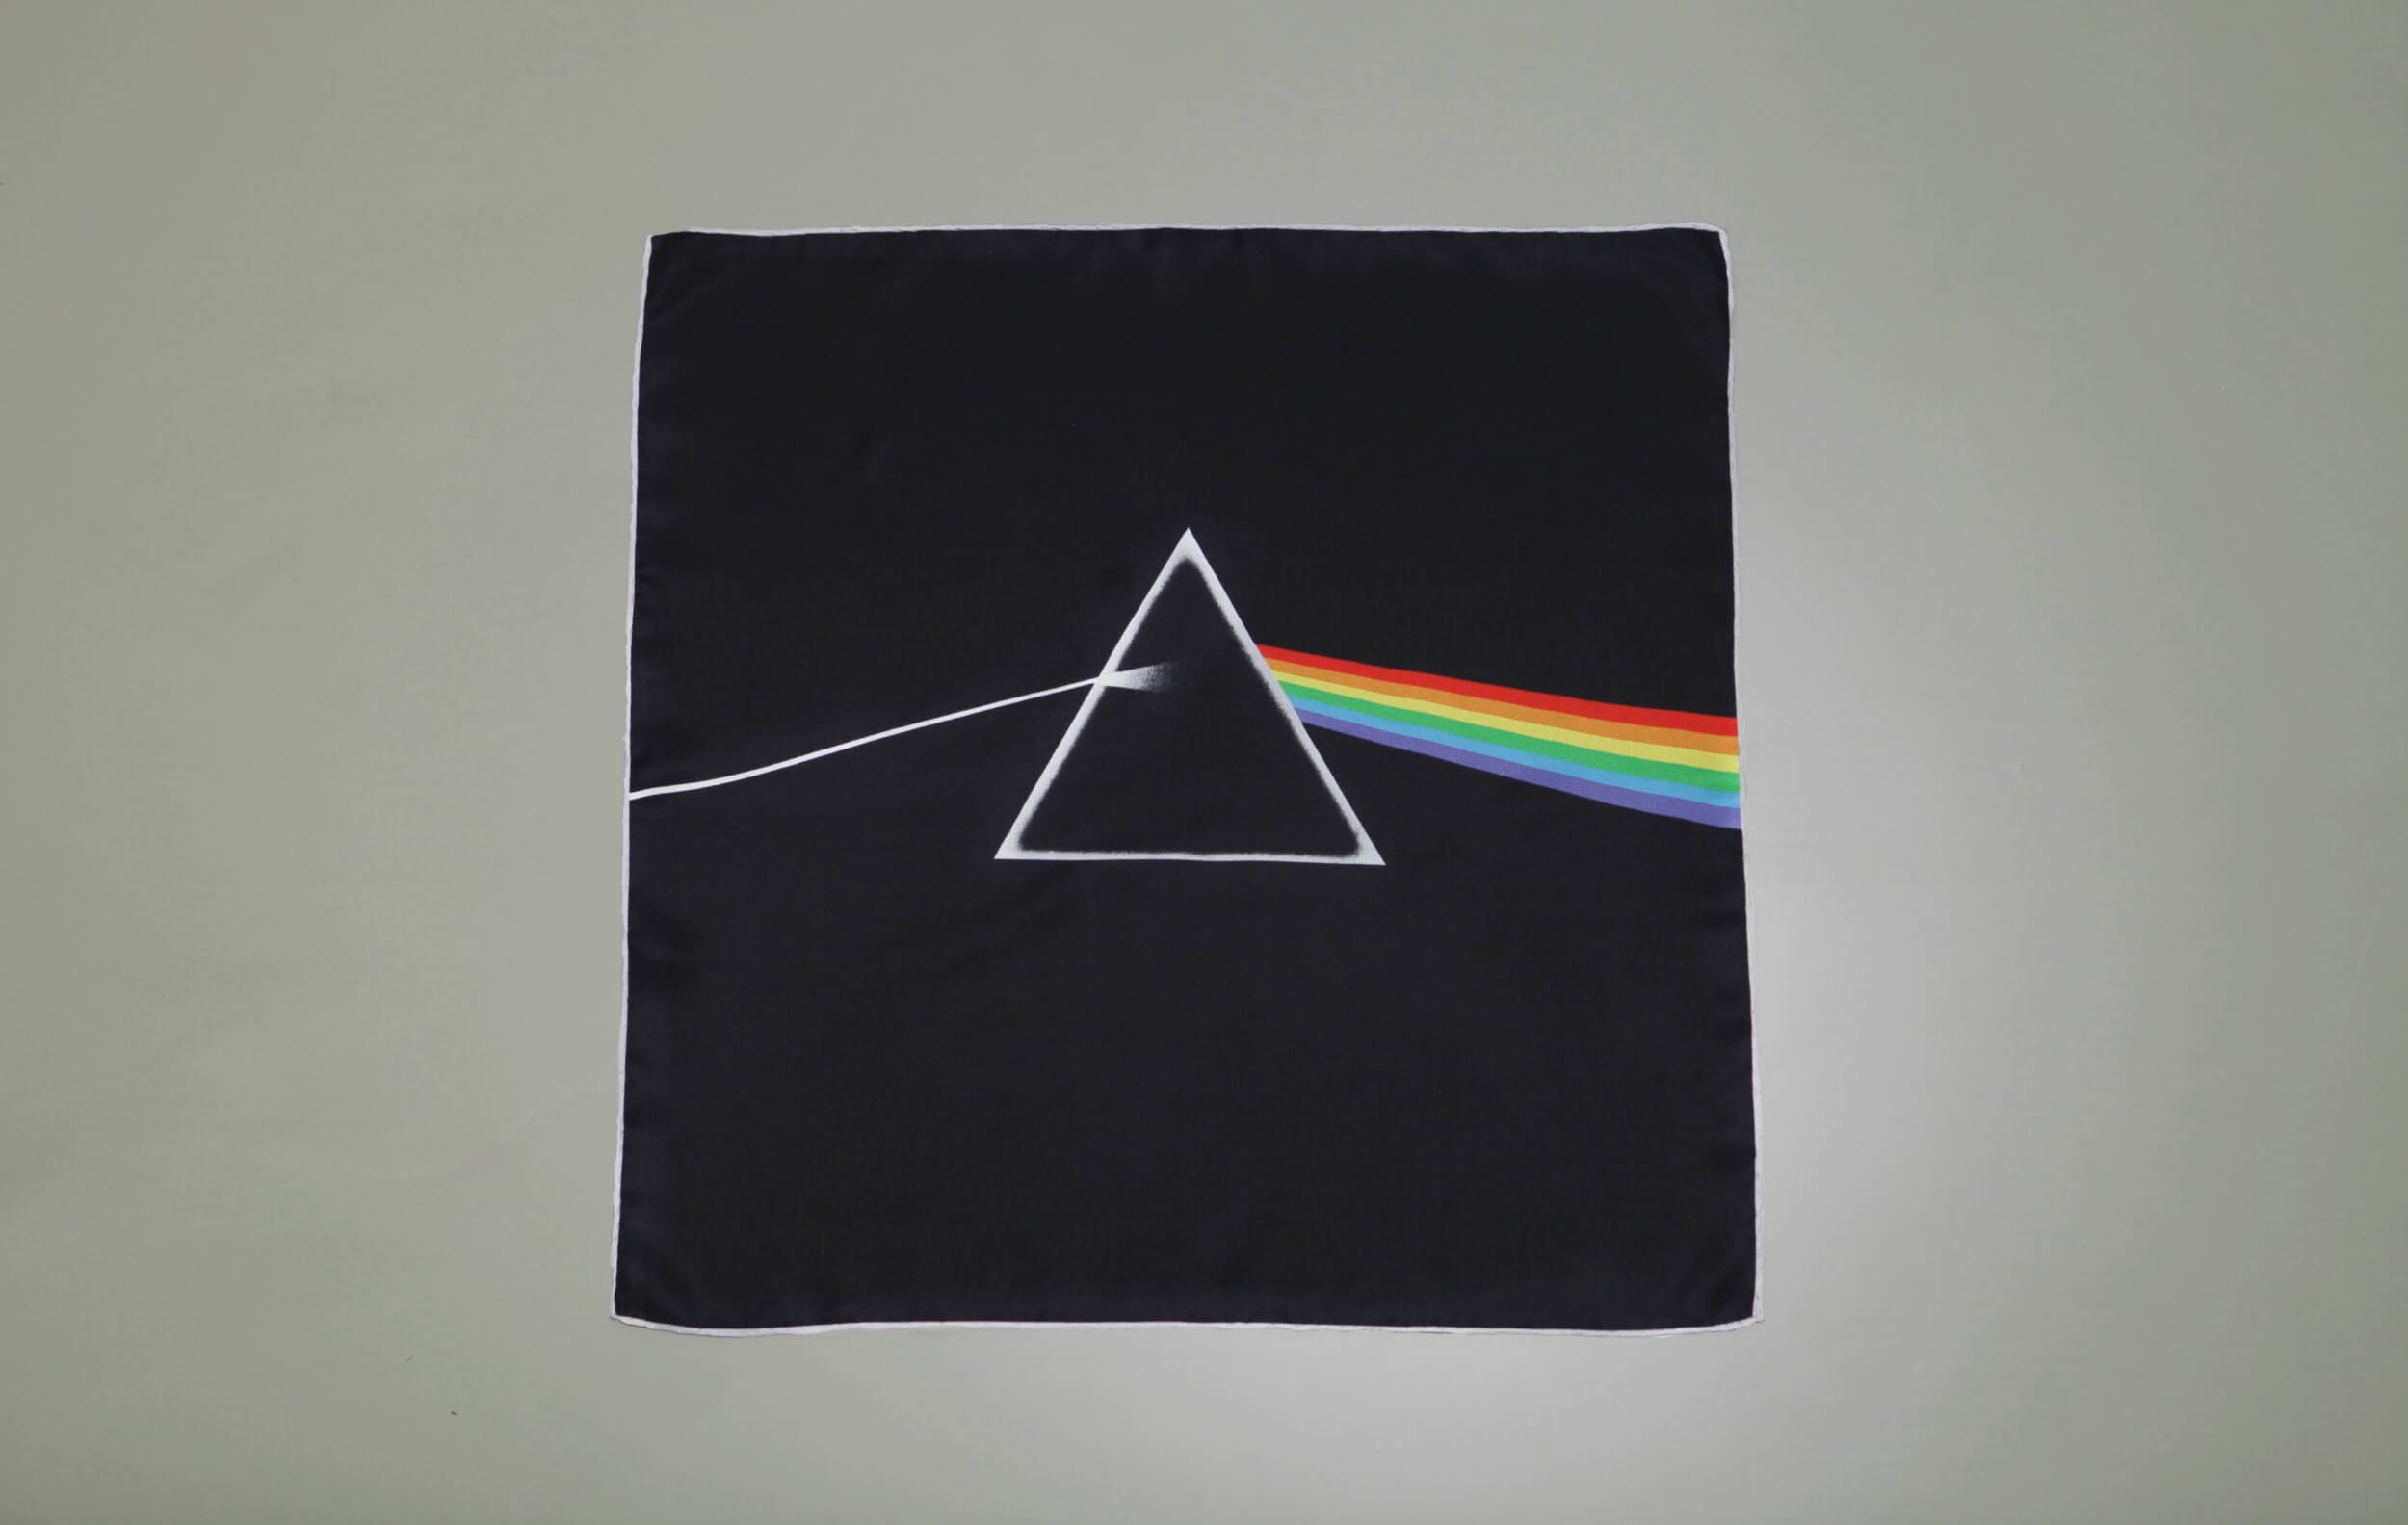 Limited edition set of three iconic Pink Floyd album covers, printed by sustainable, luxury, fashion brand Robe de Voyage, for Pink Floyd's Mortal Remains exhibition. Dark side of the moon 